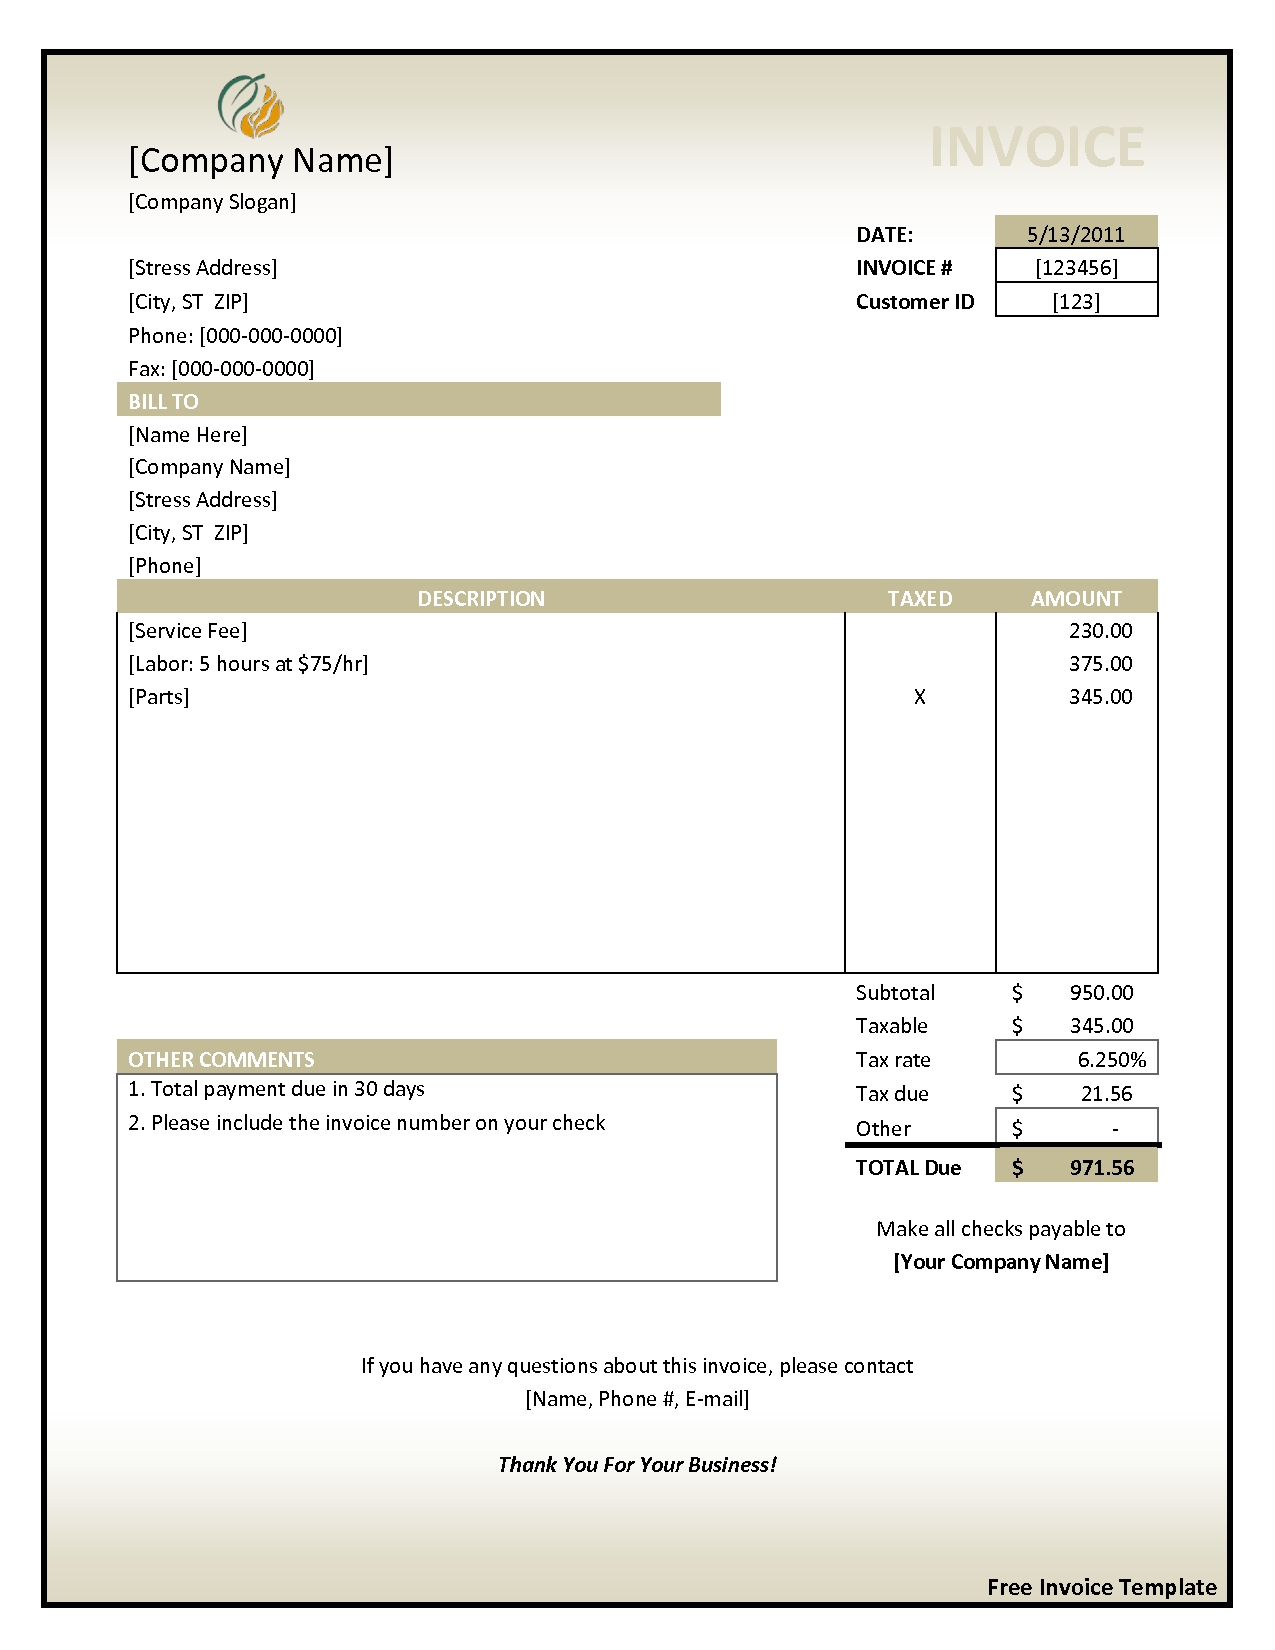 invoice format download 11 invoice format word document download best invoice template 1275 X 1650